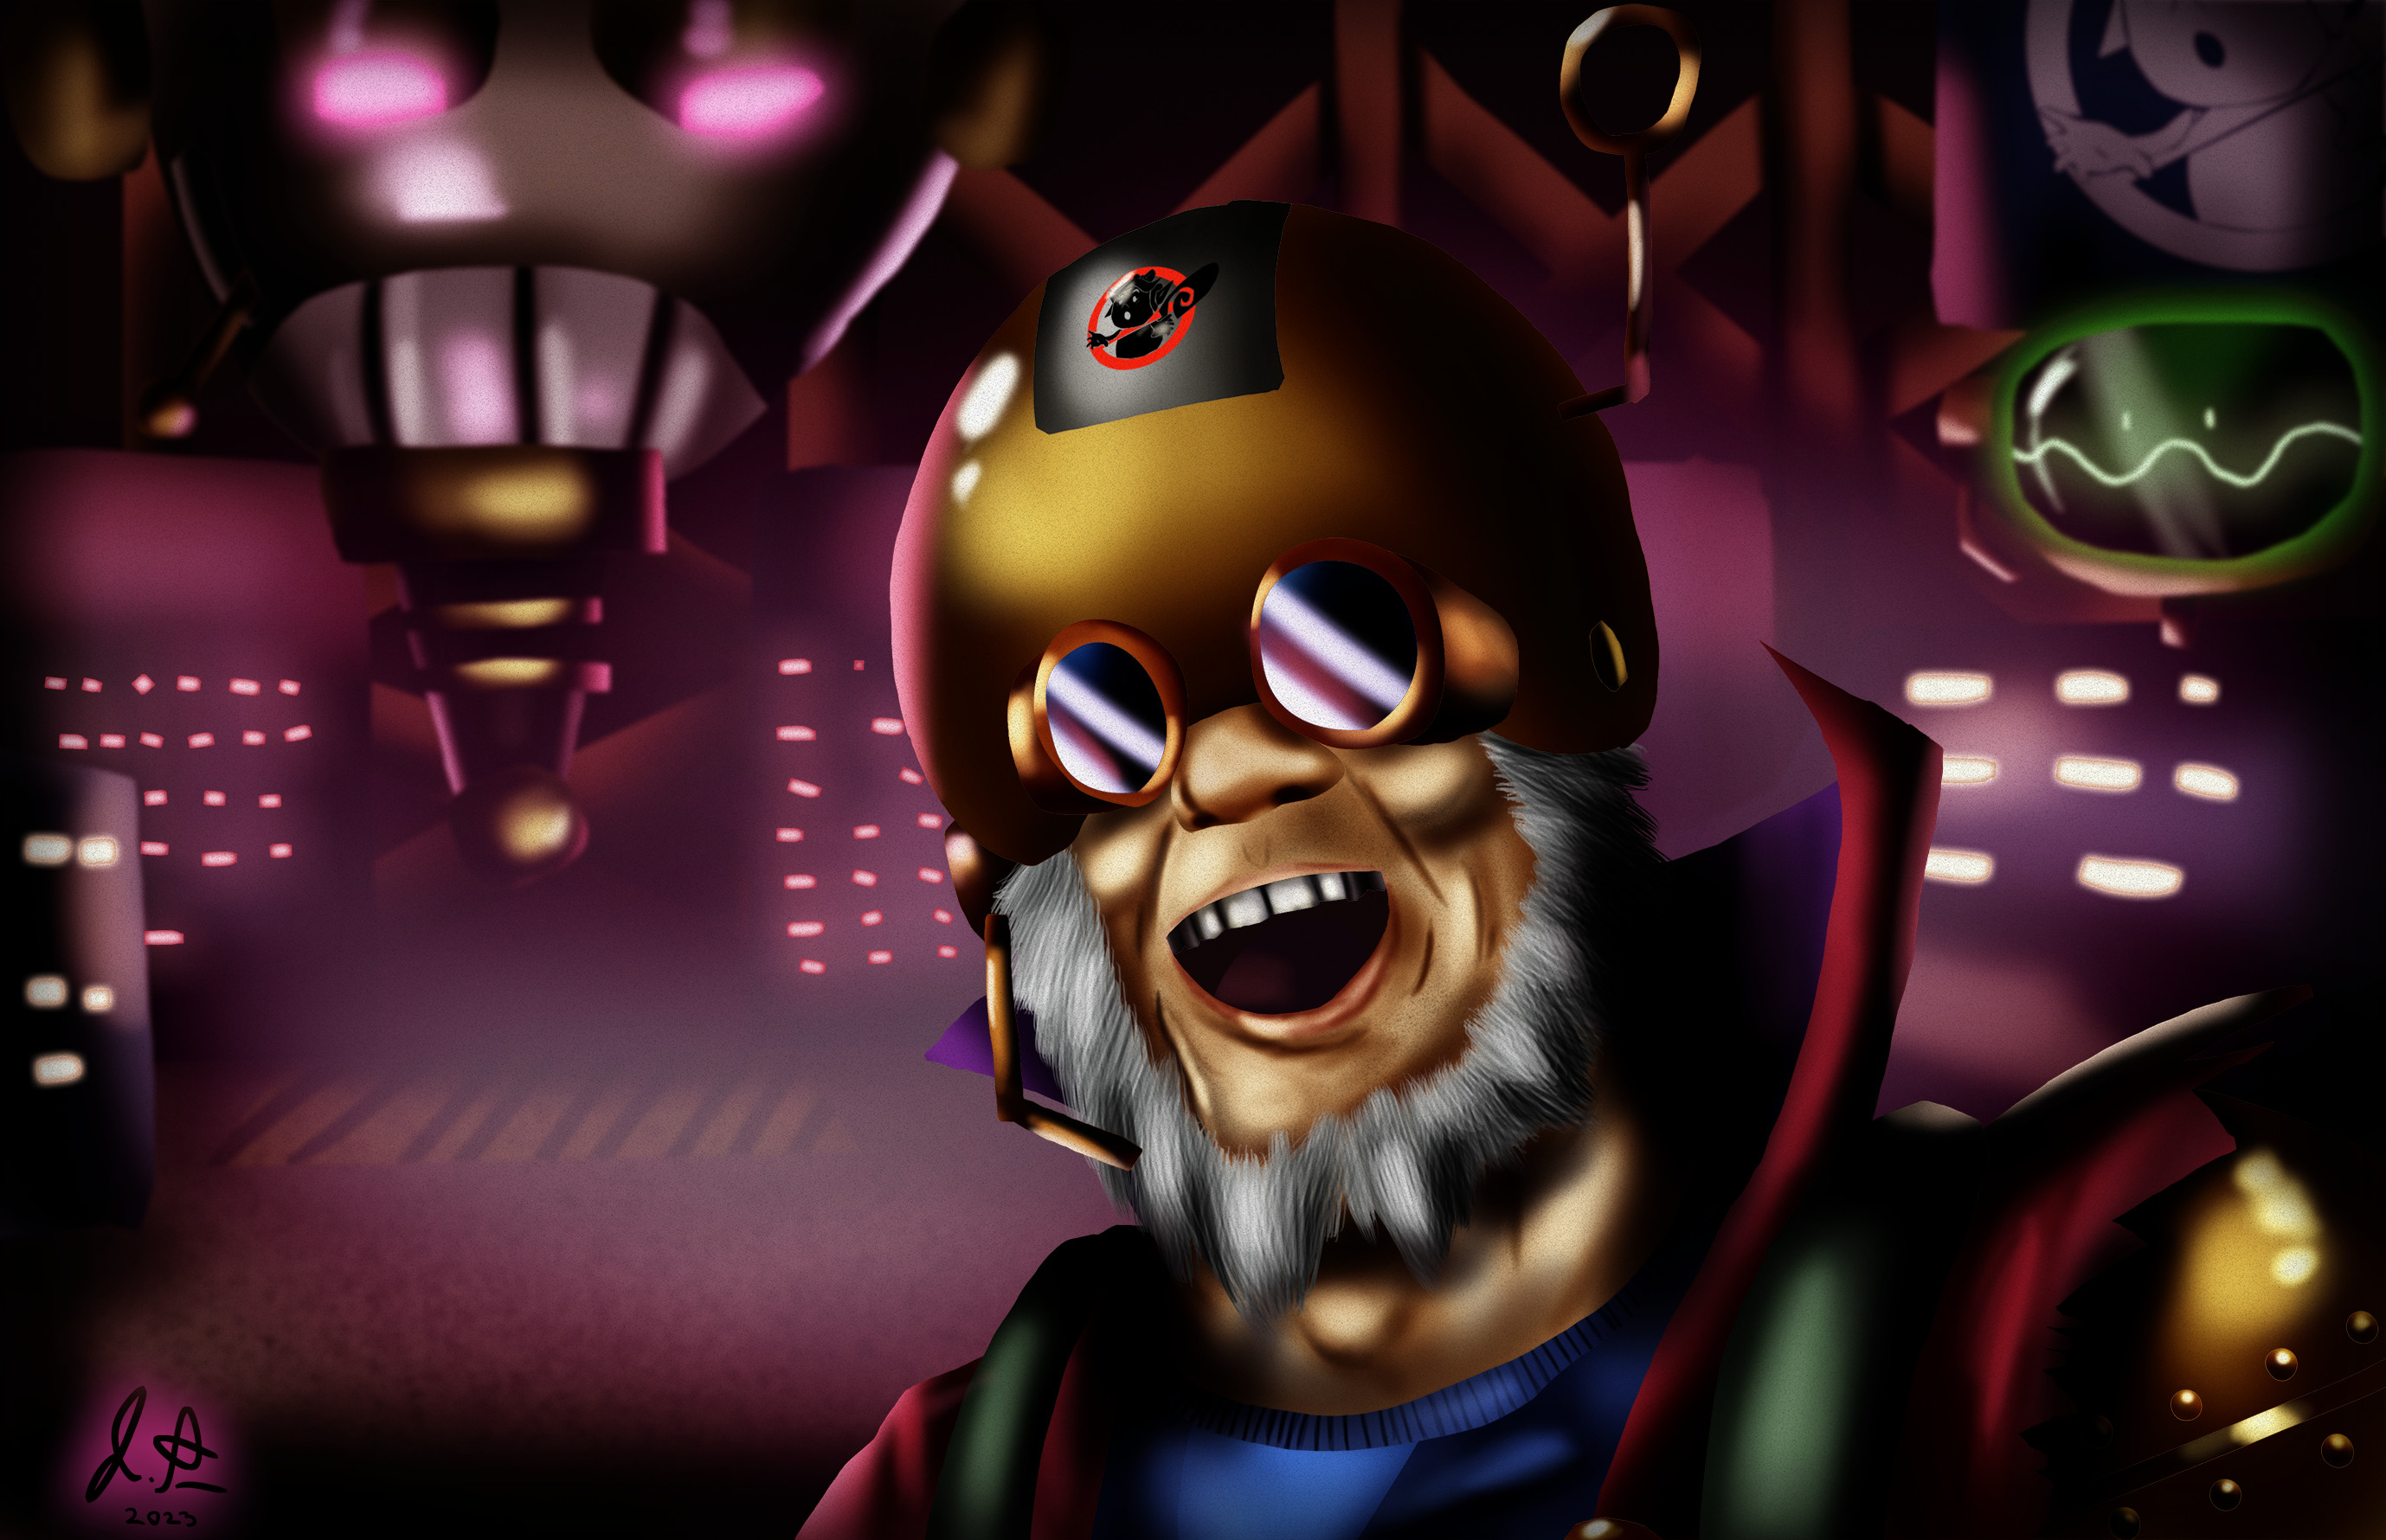 Dr. Nonfikchen in his evil lab. This one is mostly based off a render of Judge Doom, since I'd imagine Christopher Lloyd would have played Dr. Nonfikchen if it really was an 80s movie